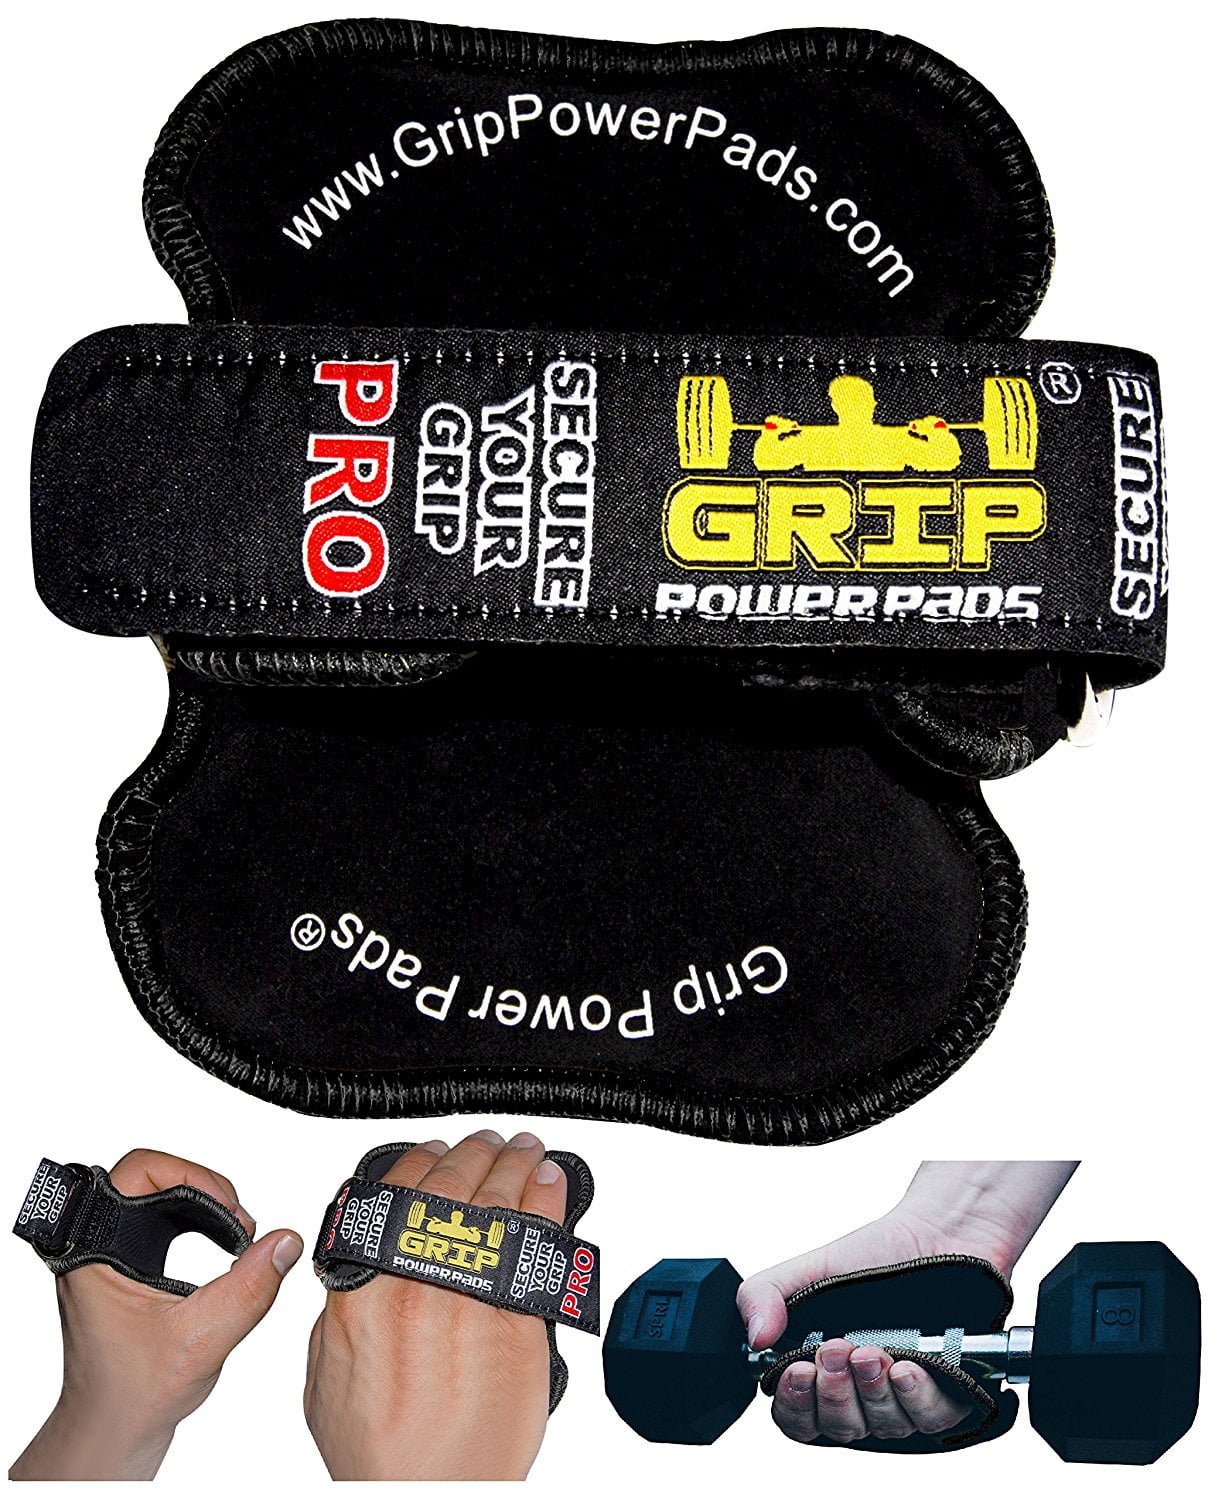 PRO WEIGHT LIFTING LEATHER GRIPS BODYBUILDING GYM STRAPS FITNESS GLOVES PADS NEW 